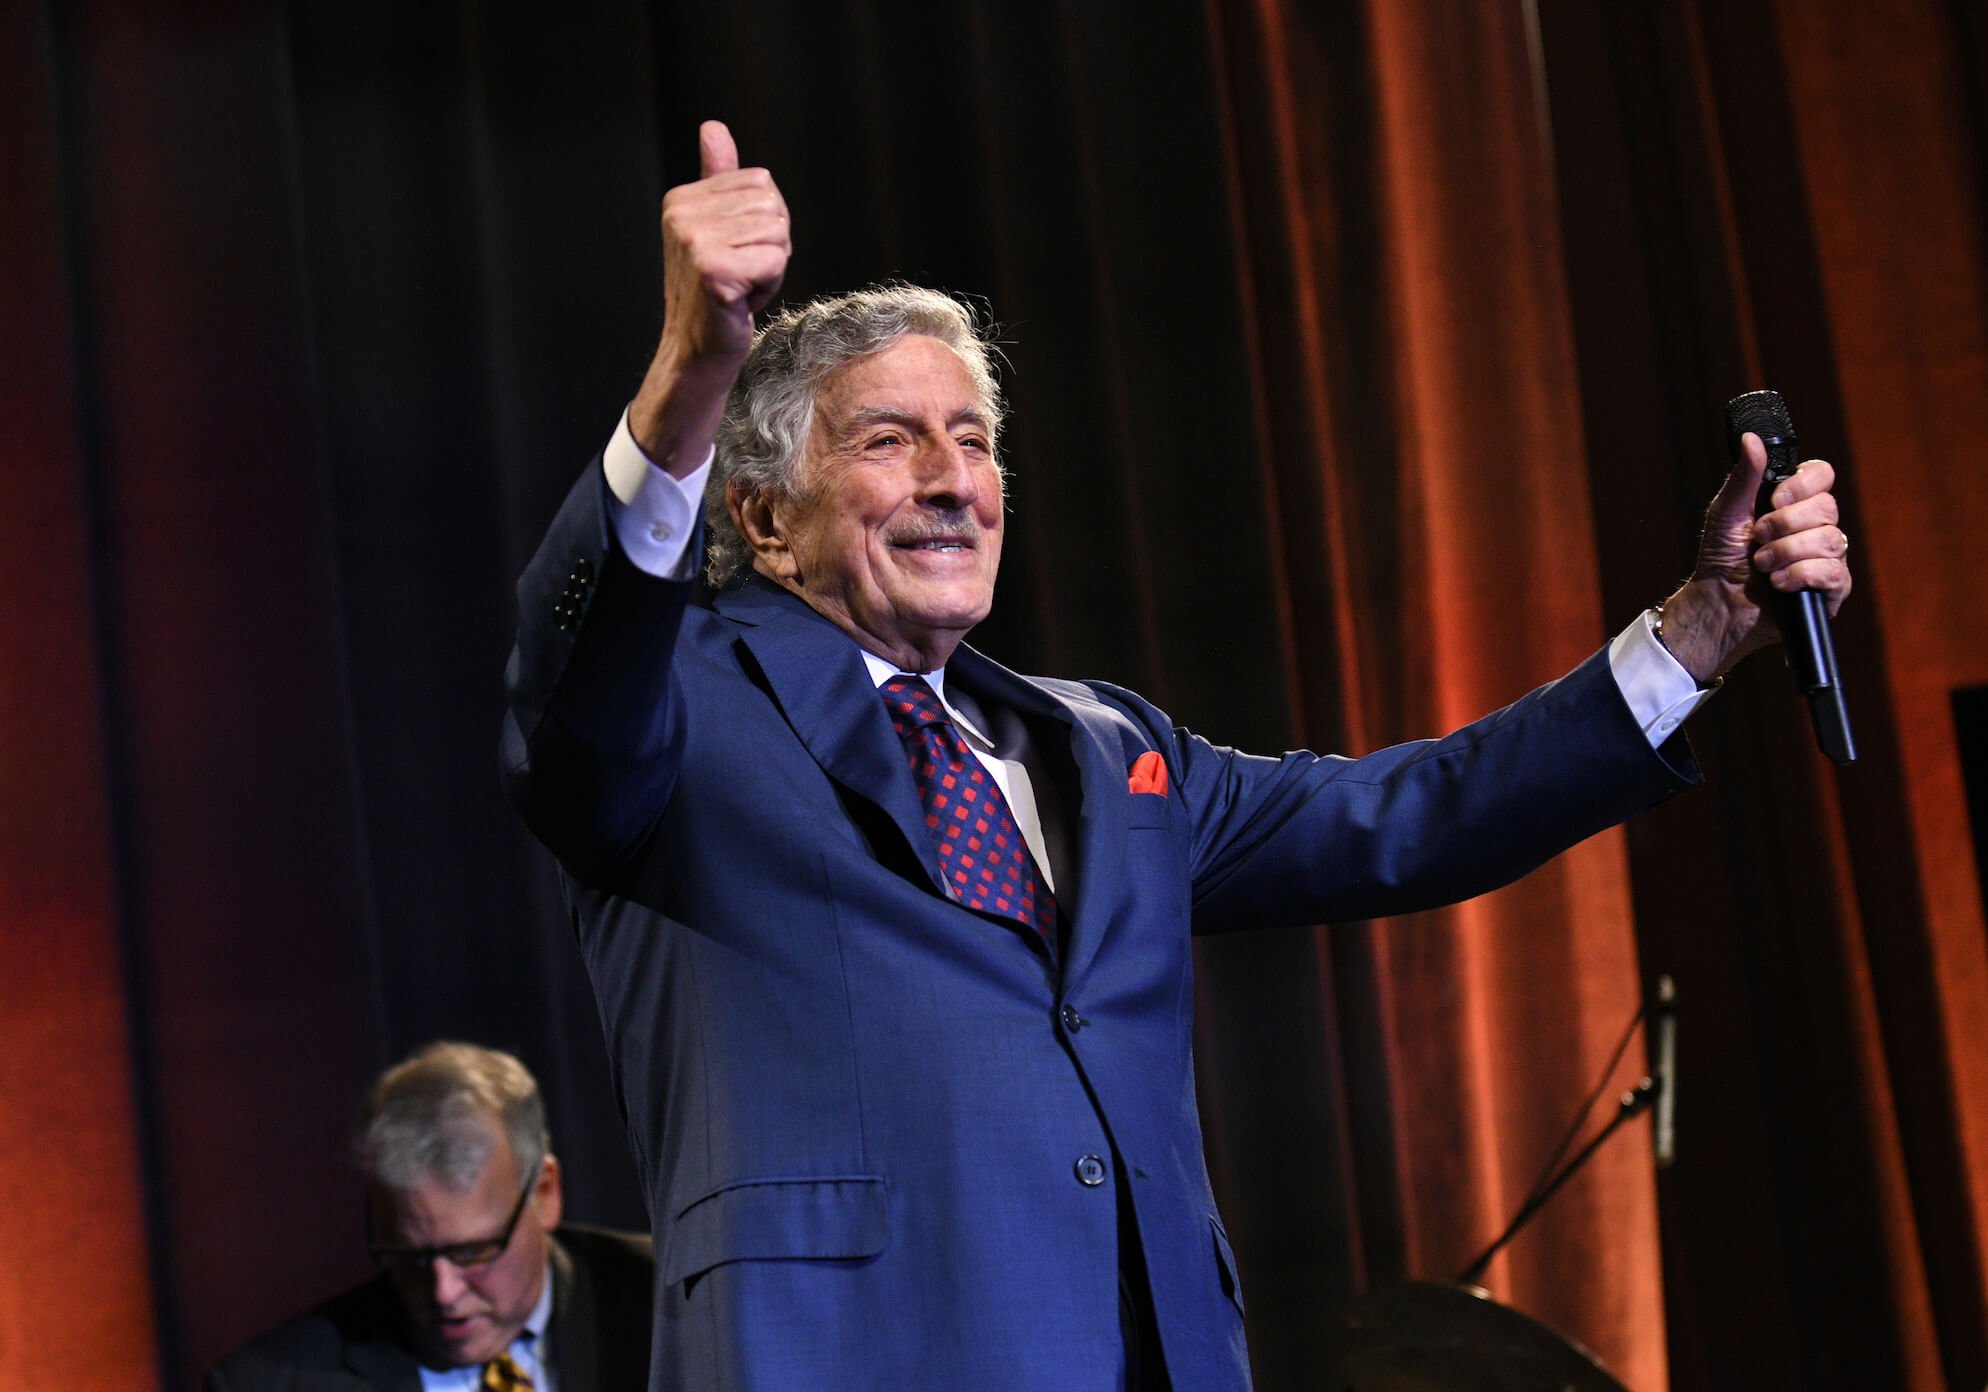 Tony Bennett in a suit holding two thumbs up and smiling